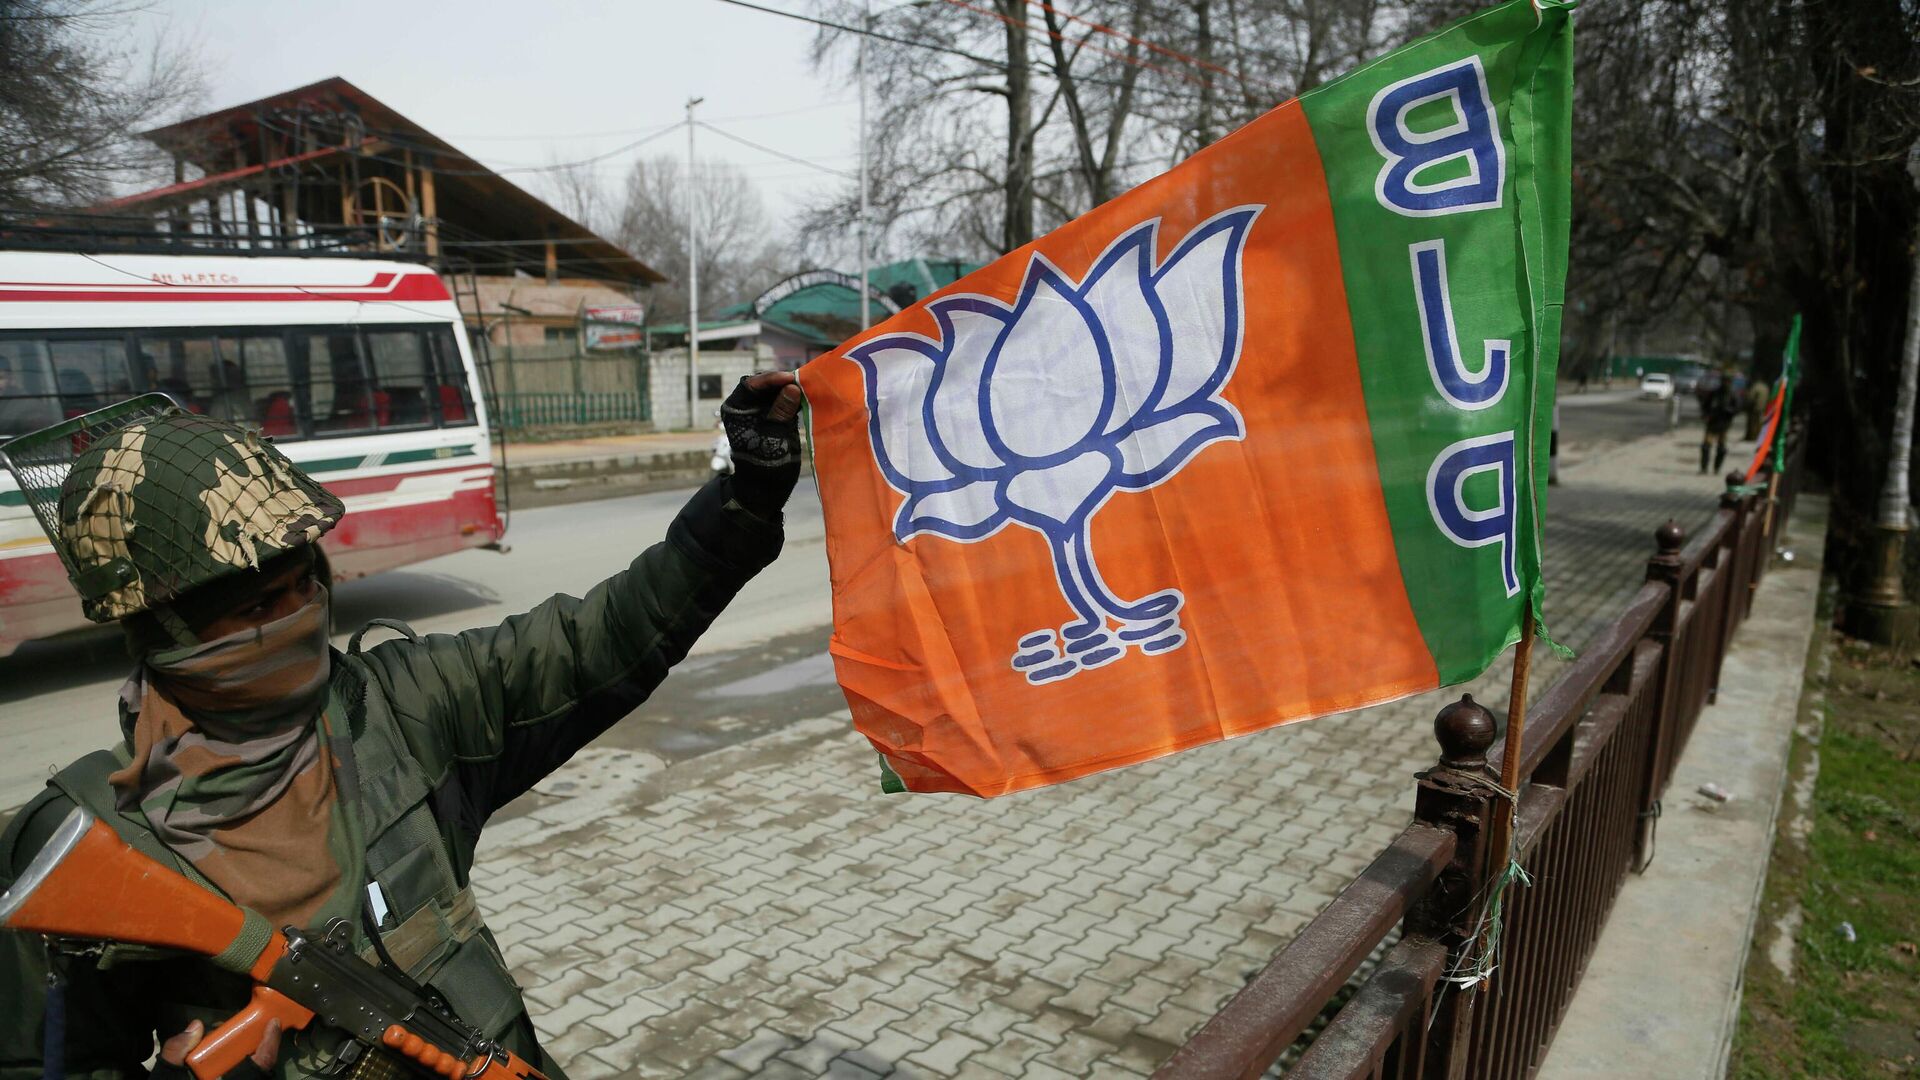 An Indian paramilitary soldier holds a flag of India's ruling Bharatiya Janata Party (BJP) as he stands guard during a meeting of the party ahead of the upcoming elections in Srinagar, Indian controlled Kashmir, Thursday, March 14, 2019 - Sputnik International, 1920, 21.06.2022